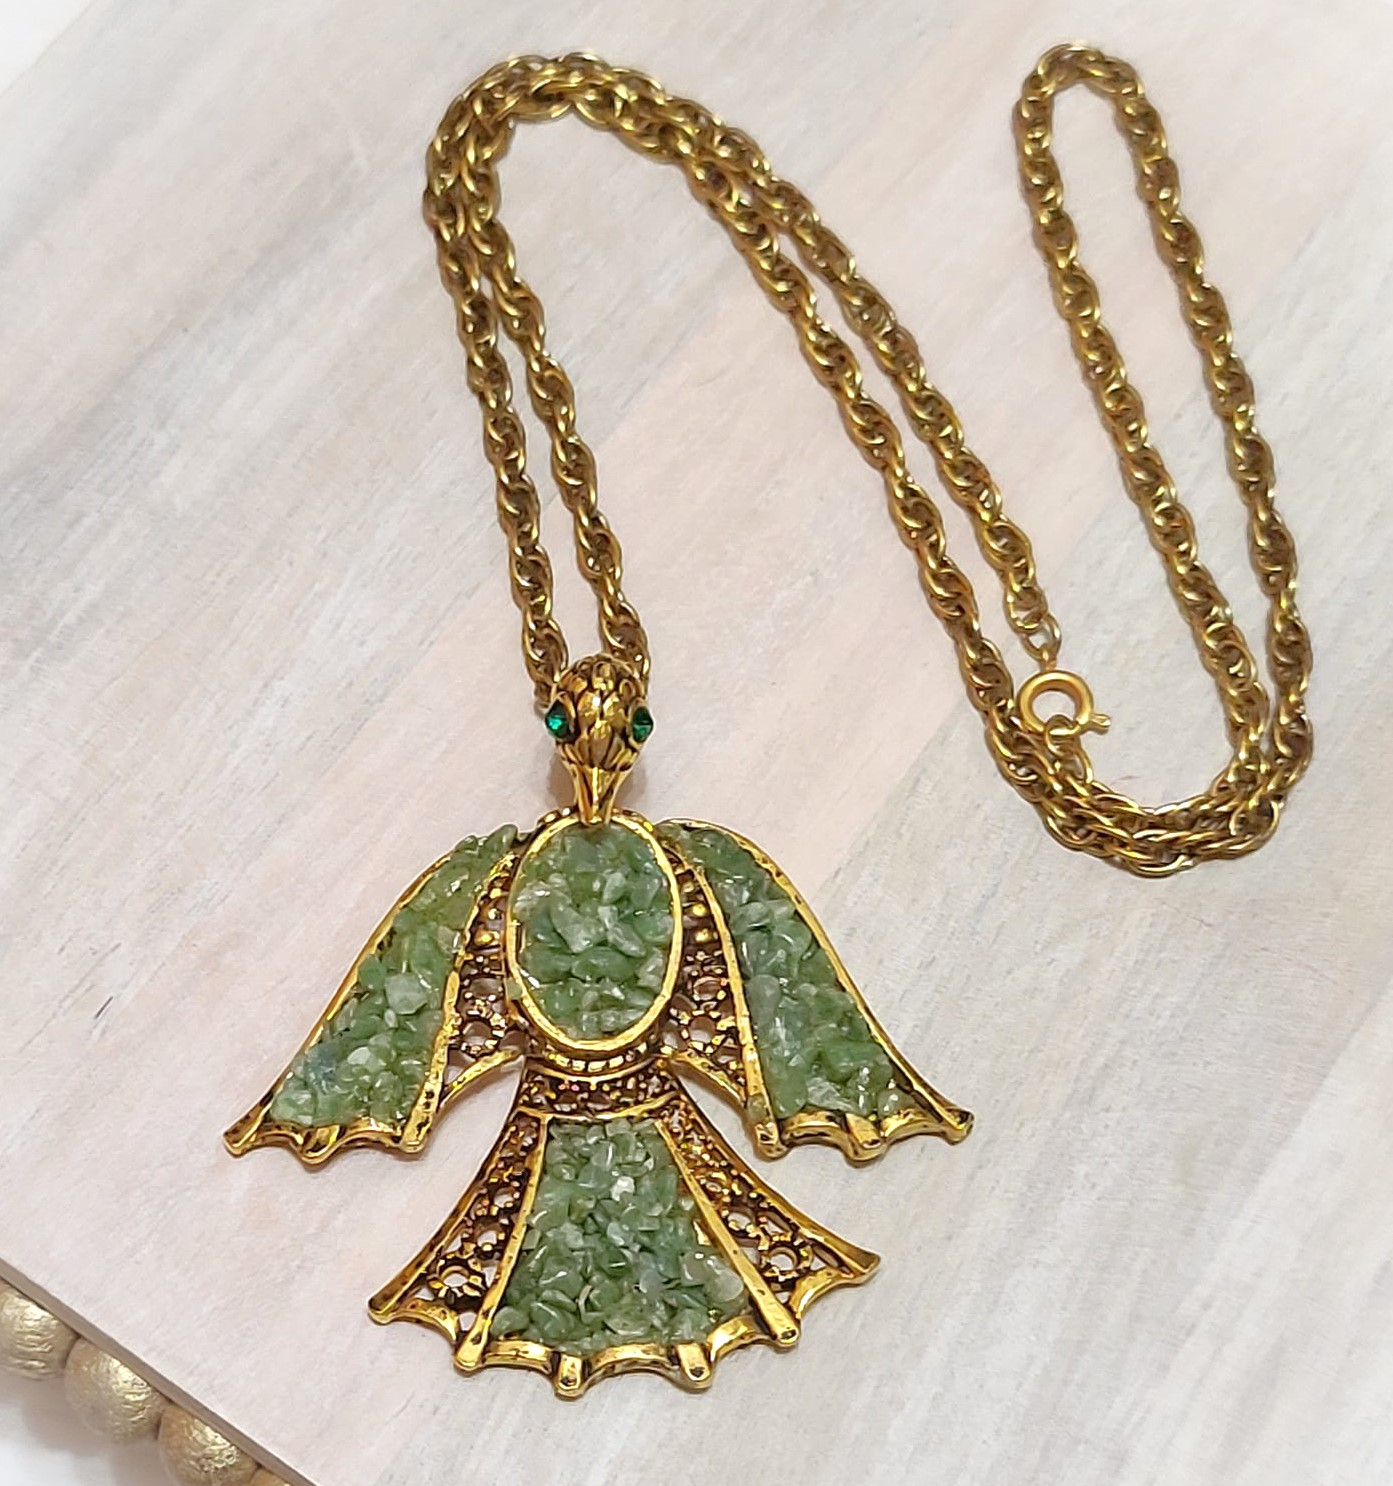 Phoenix pendant necklace with jade gemstone chips on chain